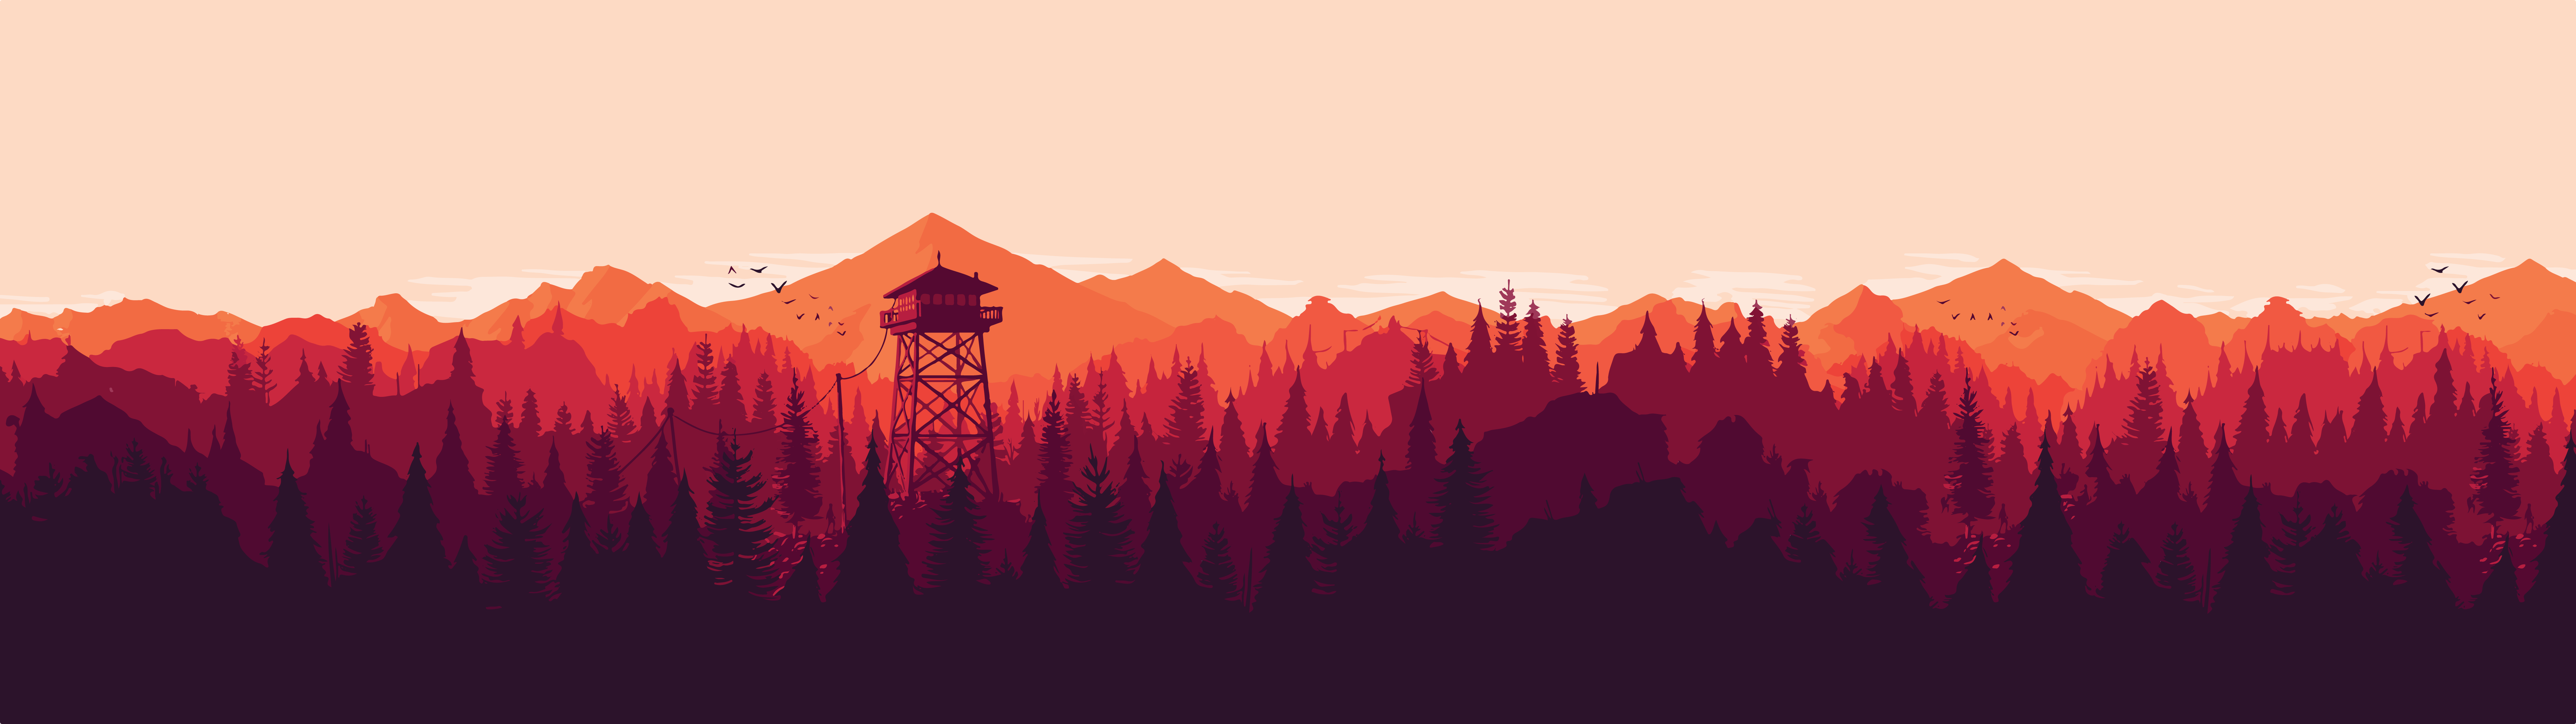 Wide Image Minimalism Simple Background Wide Angle Firewatch Wallpaper:7680x2160